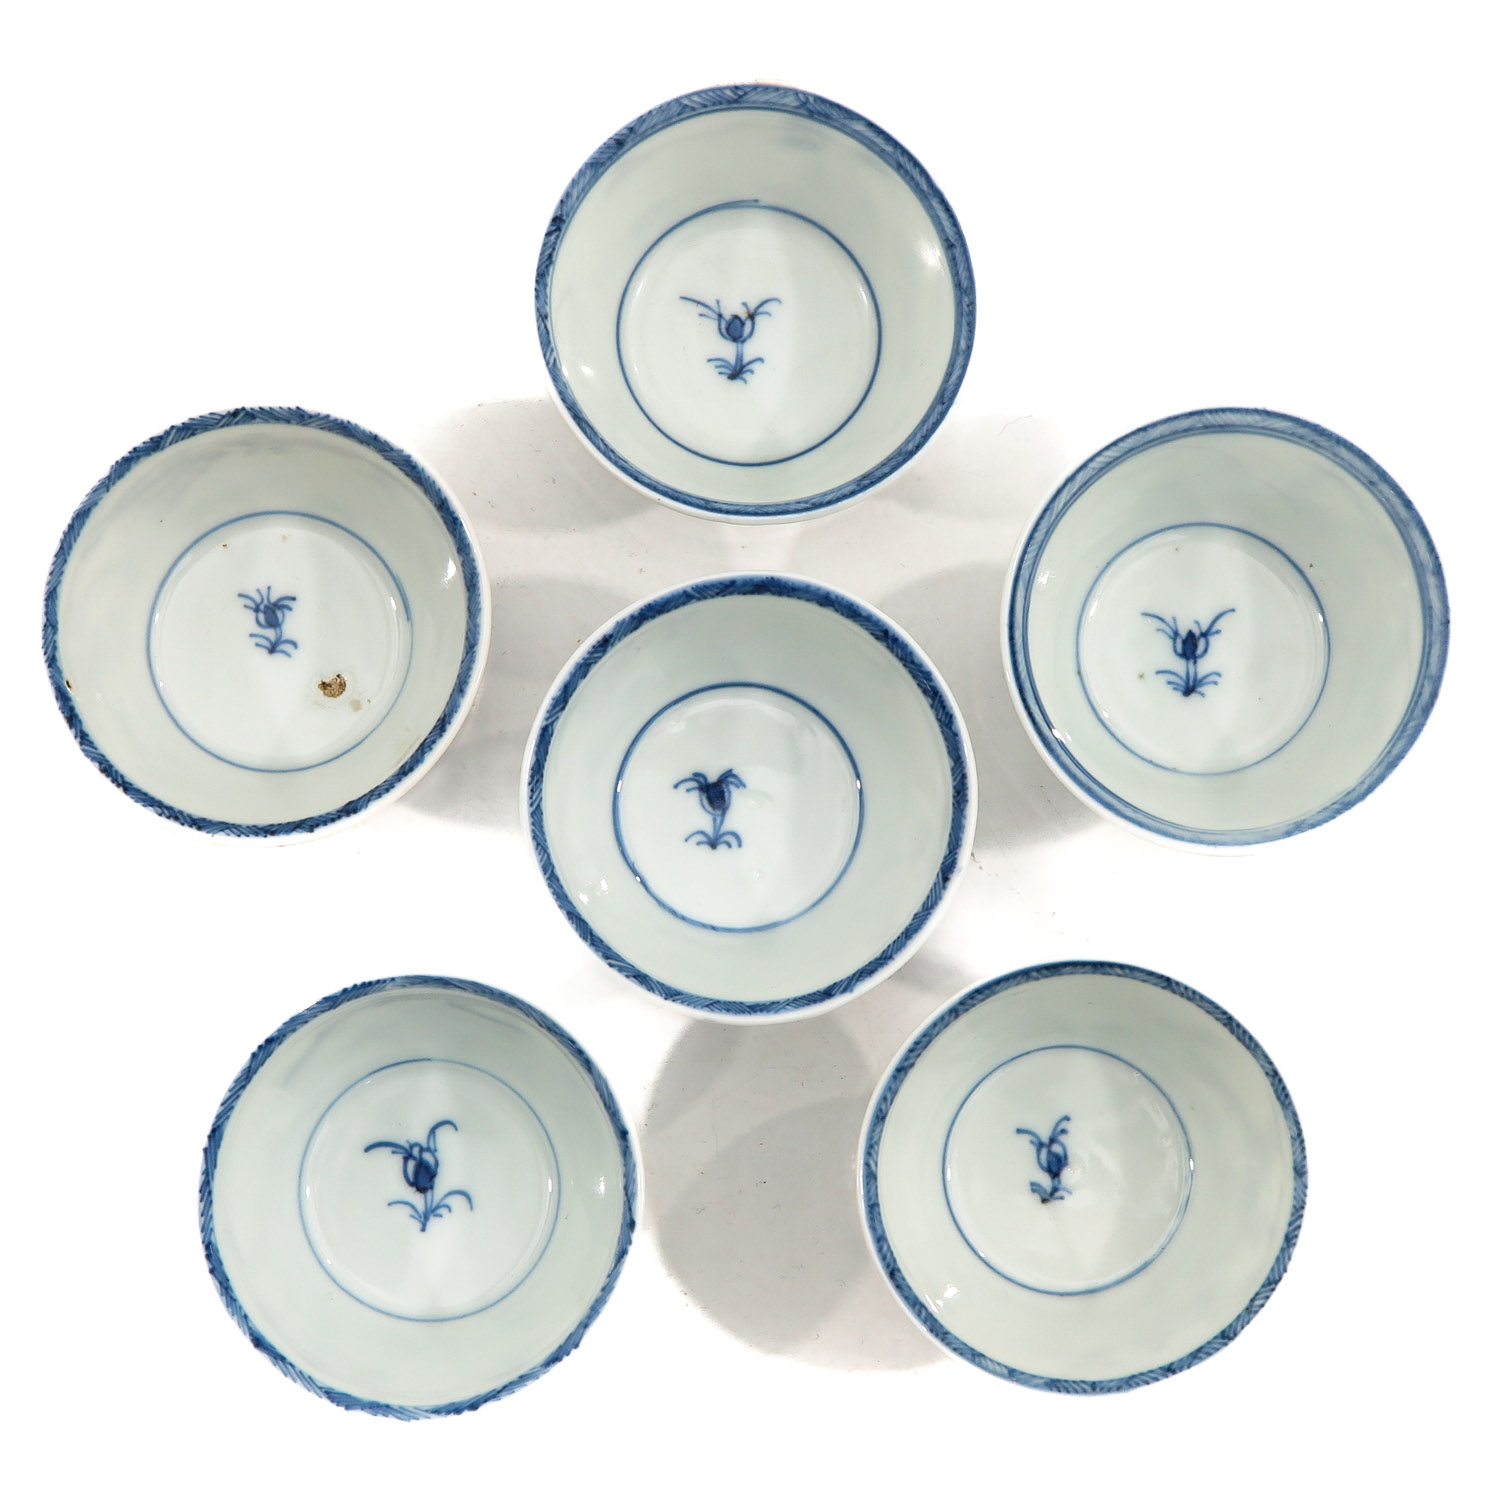 A Series of 6 Blue and White Cups and Saucers - Image 5 of 10